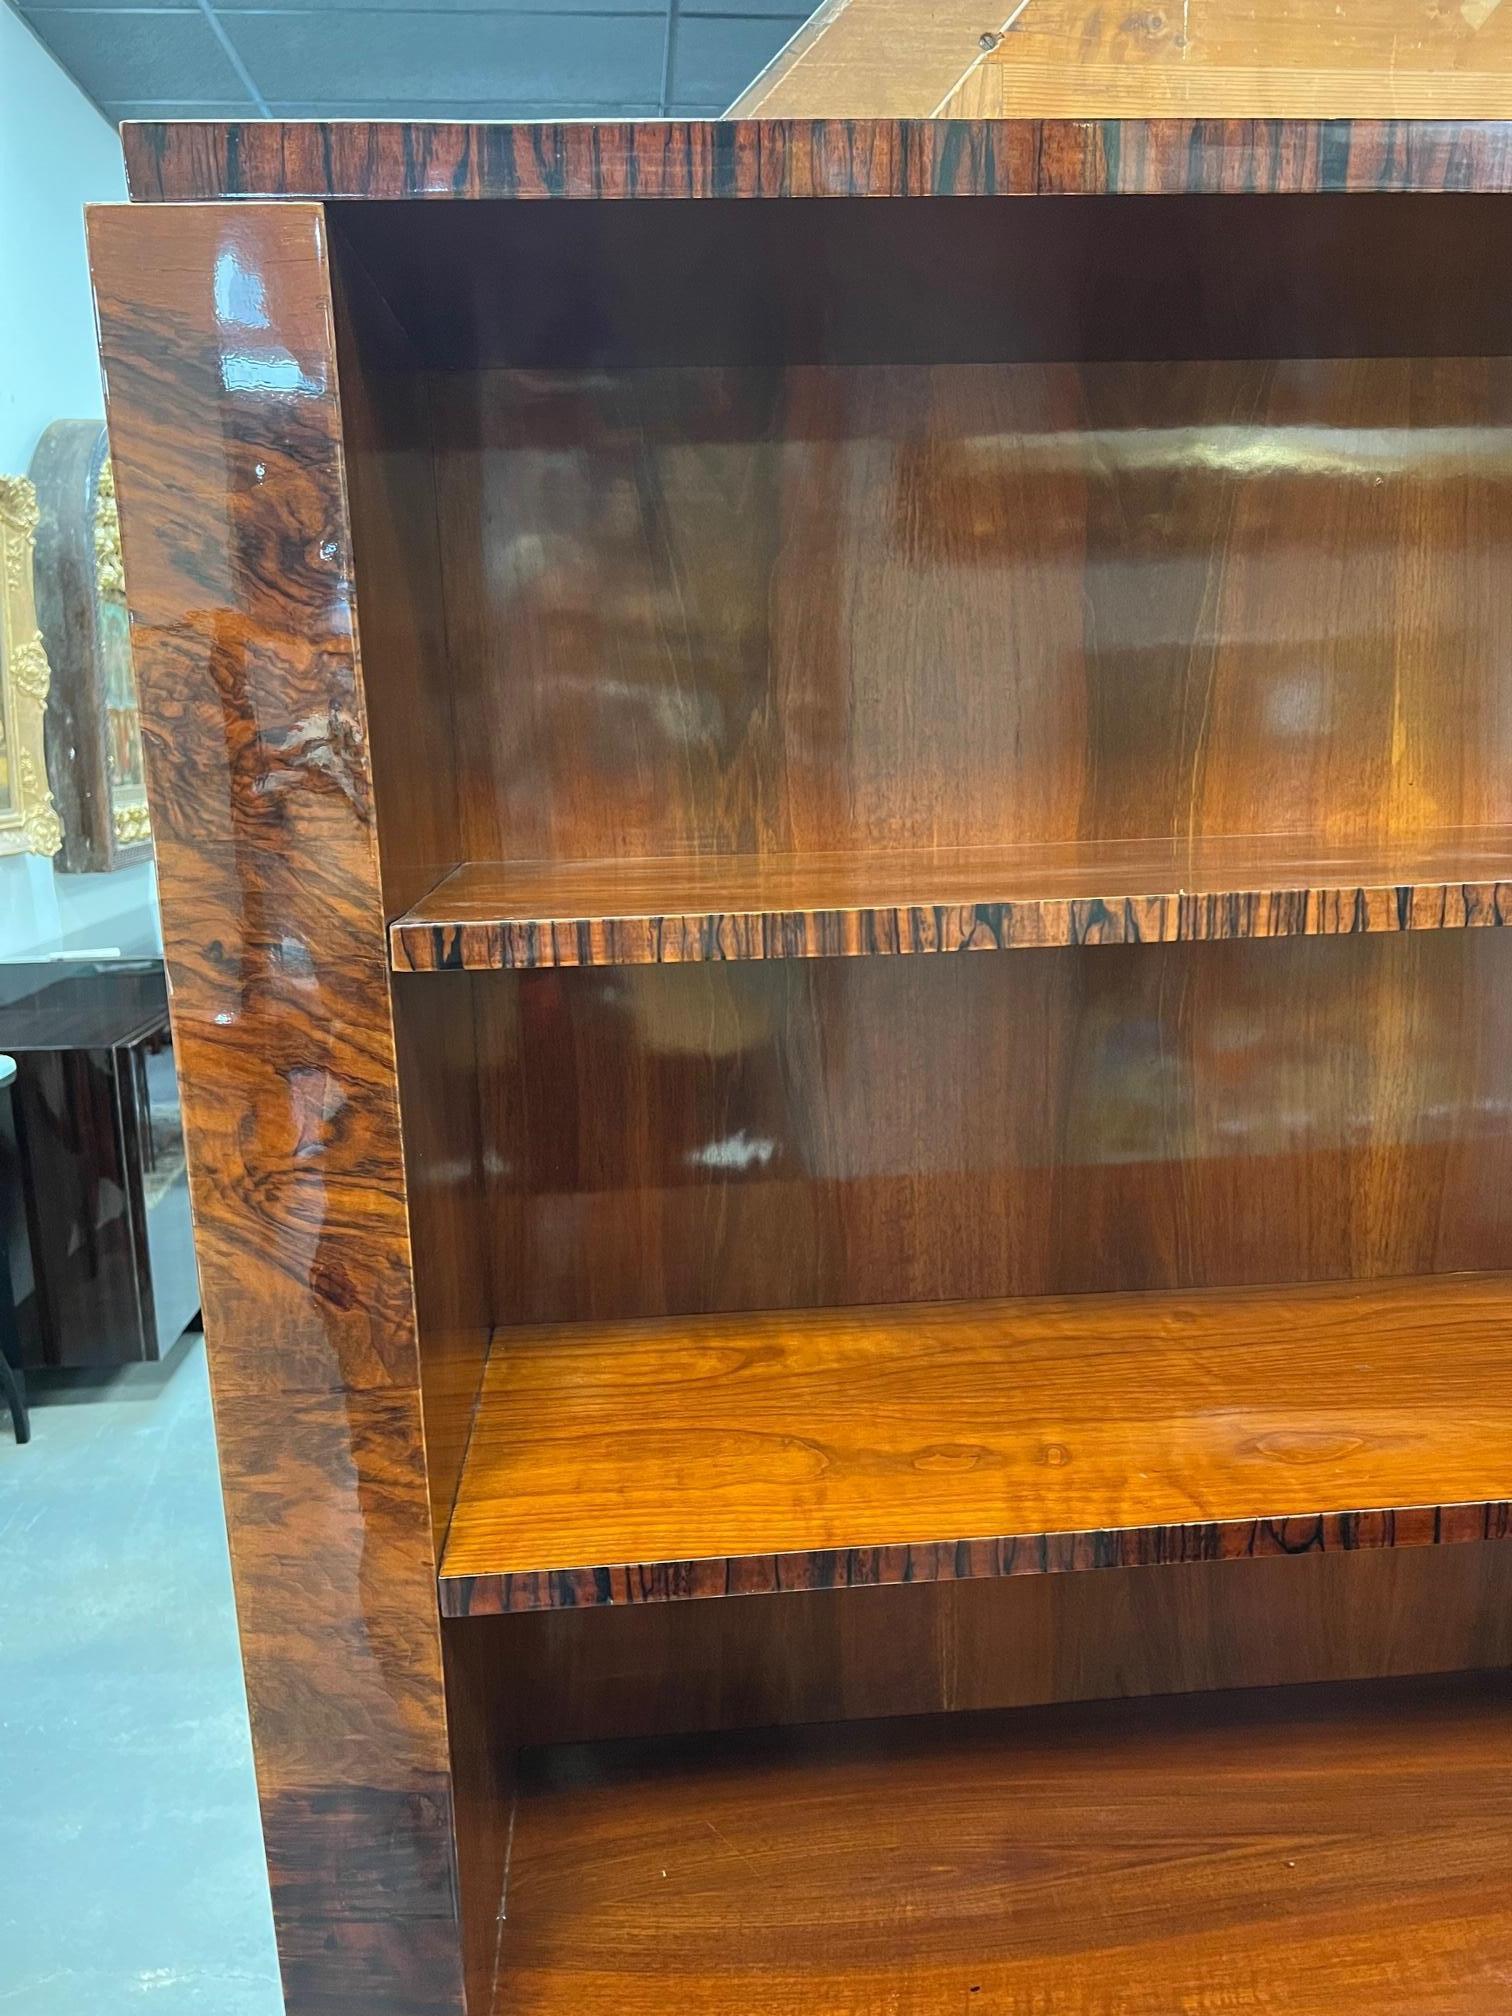 Art Deco Book case/ credenza. There are 3 big shelves and multiple little shelves and drawers with silver handles on the lower part of the bookcase. It rests on 2 wide legs. Bookcase is made out of walnut wood and Burl Walnut. 
Condition is very